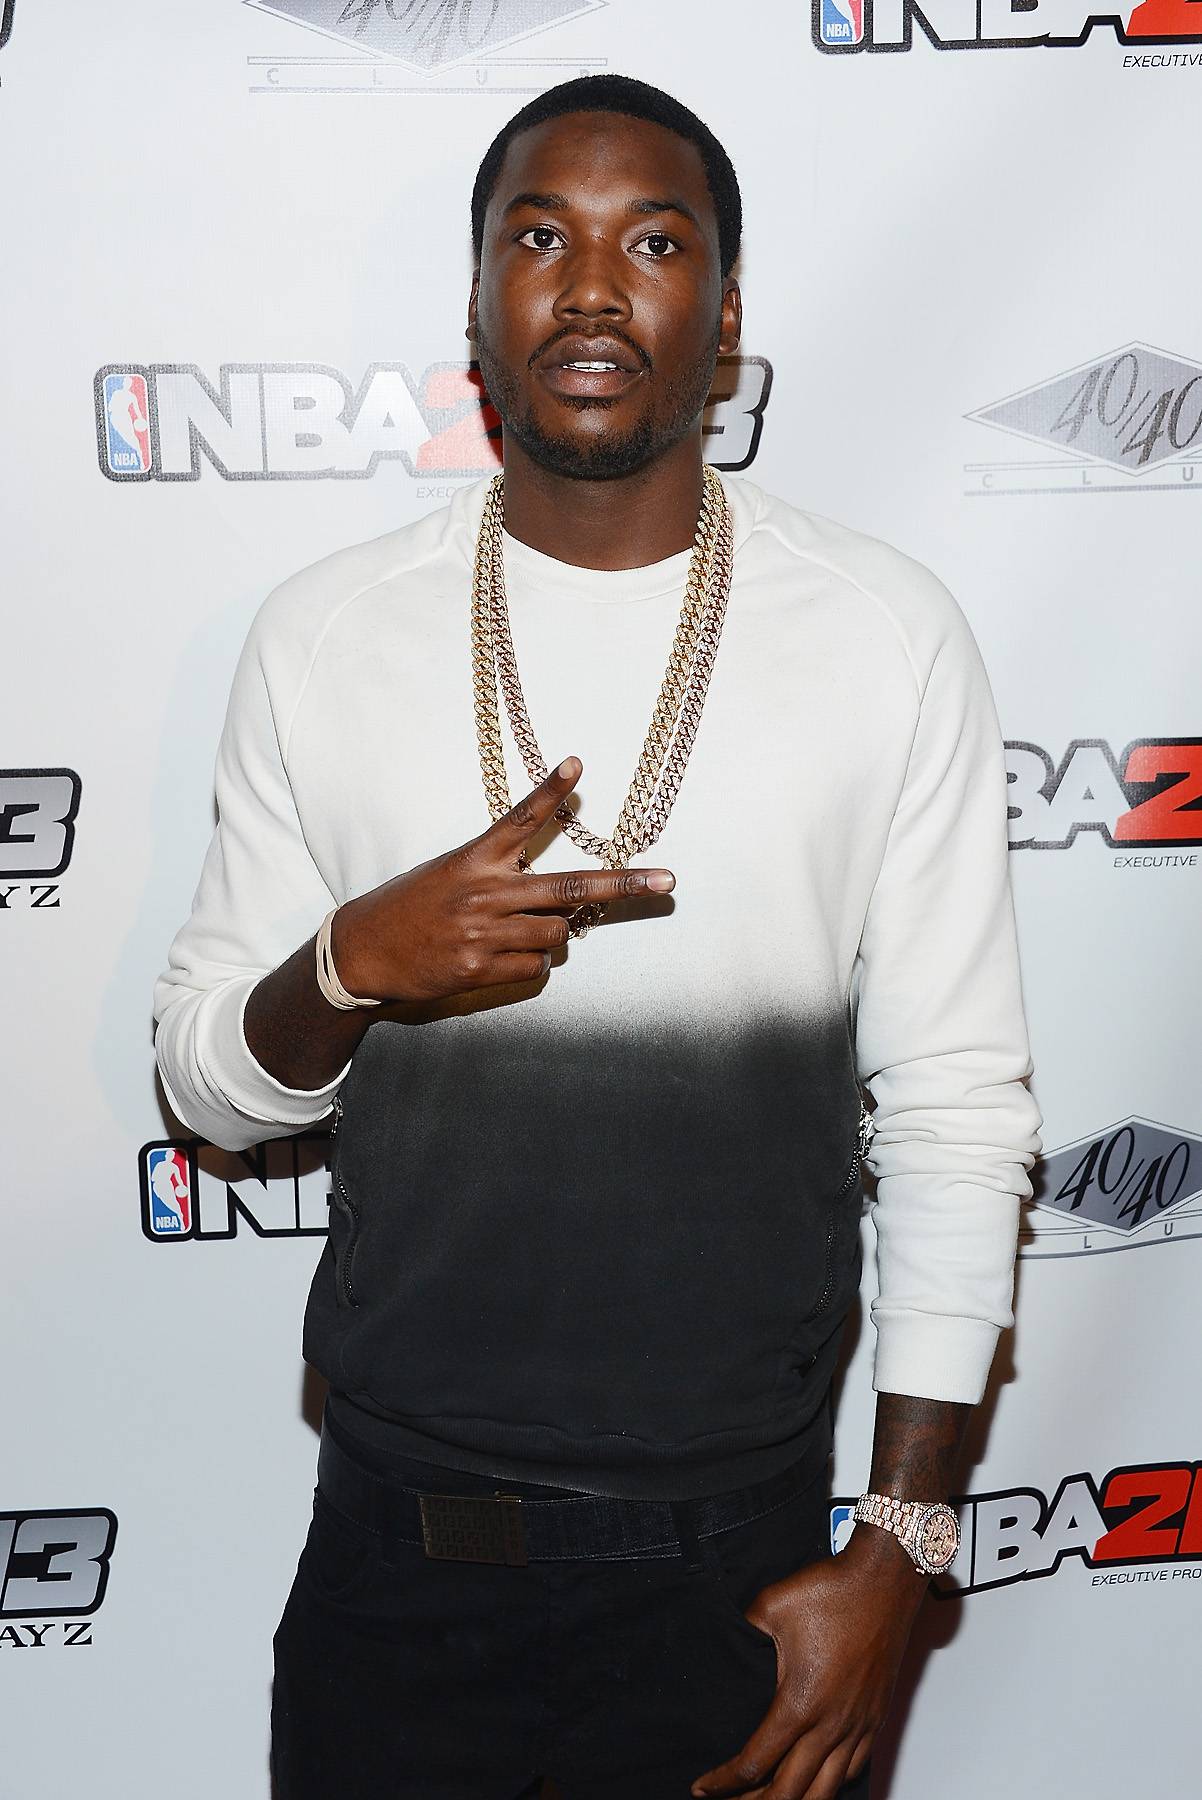 Meek Mill NBA 2K13 Cover Athletes and NBA Superstars Party